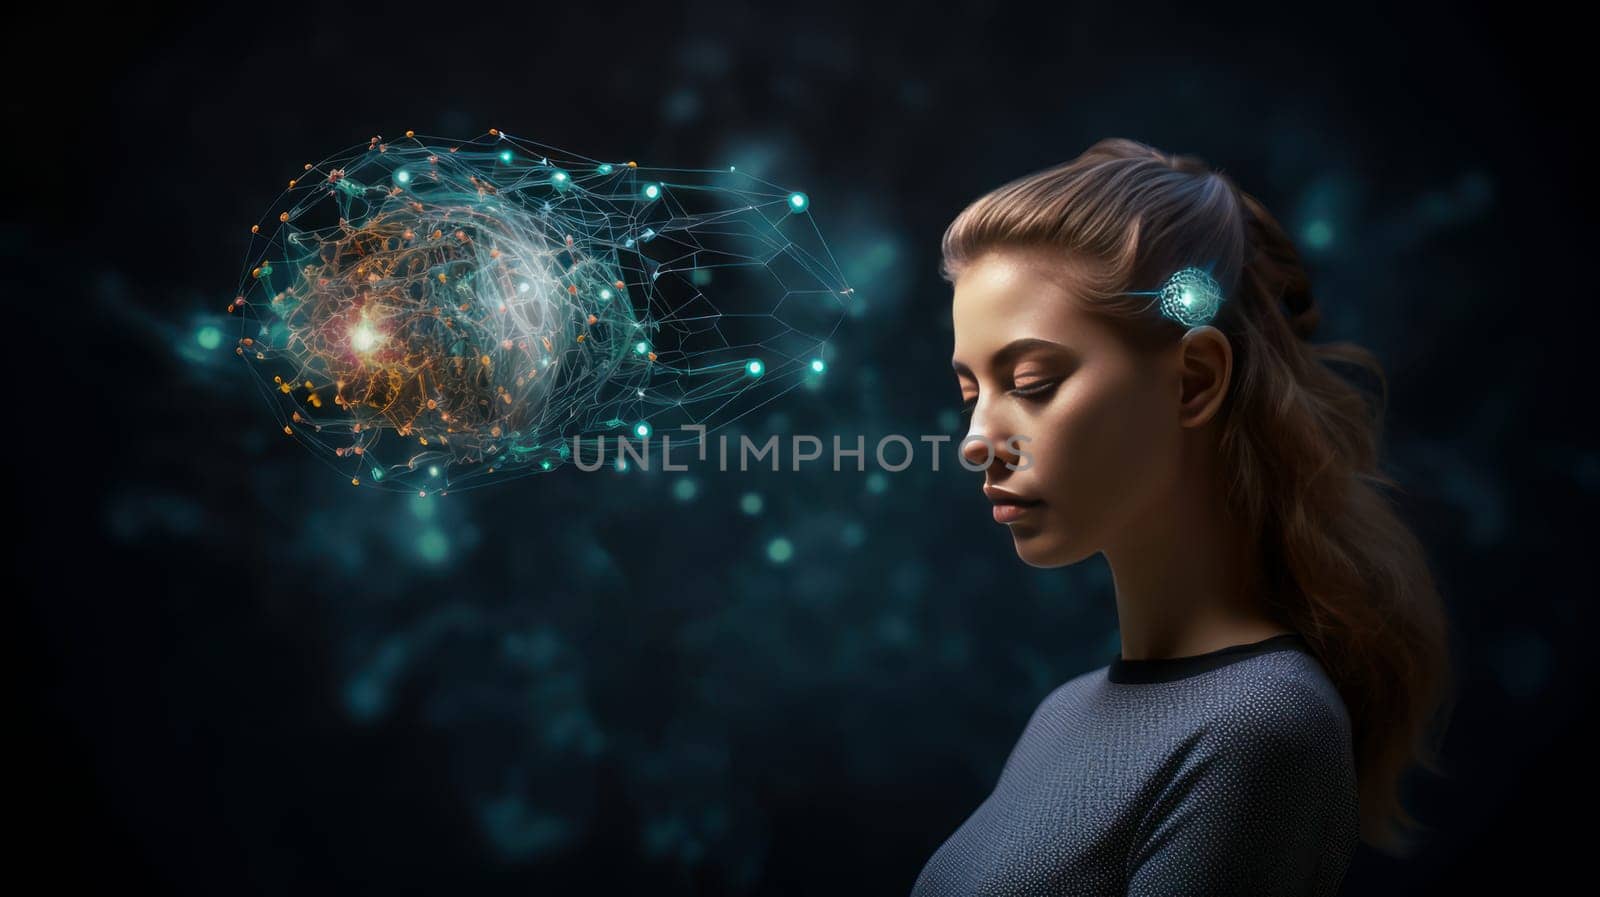 A girl woman connected neural networks with AI. confrontation between humanity artificial intelligence. Big data transmission protocol system. Robotics or artificial intelligence artificial intelligence connecting human interaction. Chatbot software